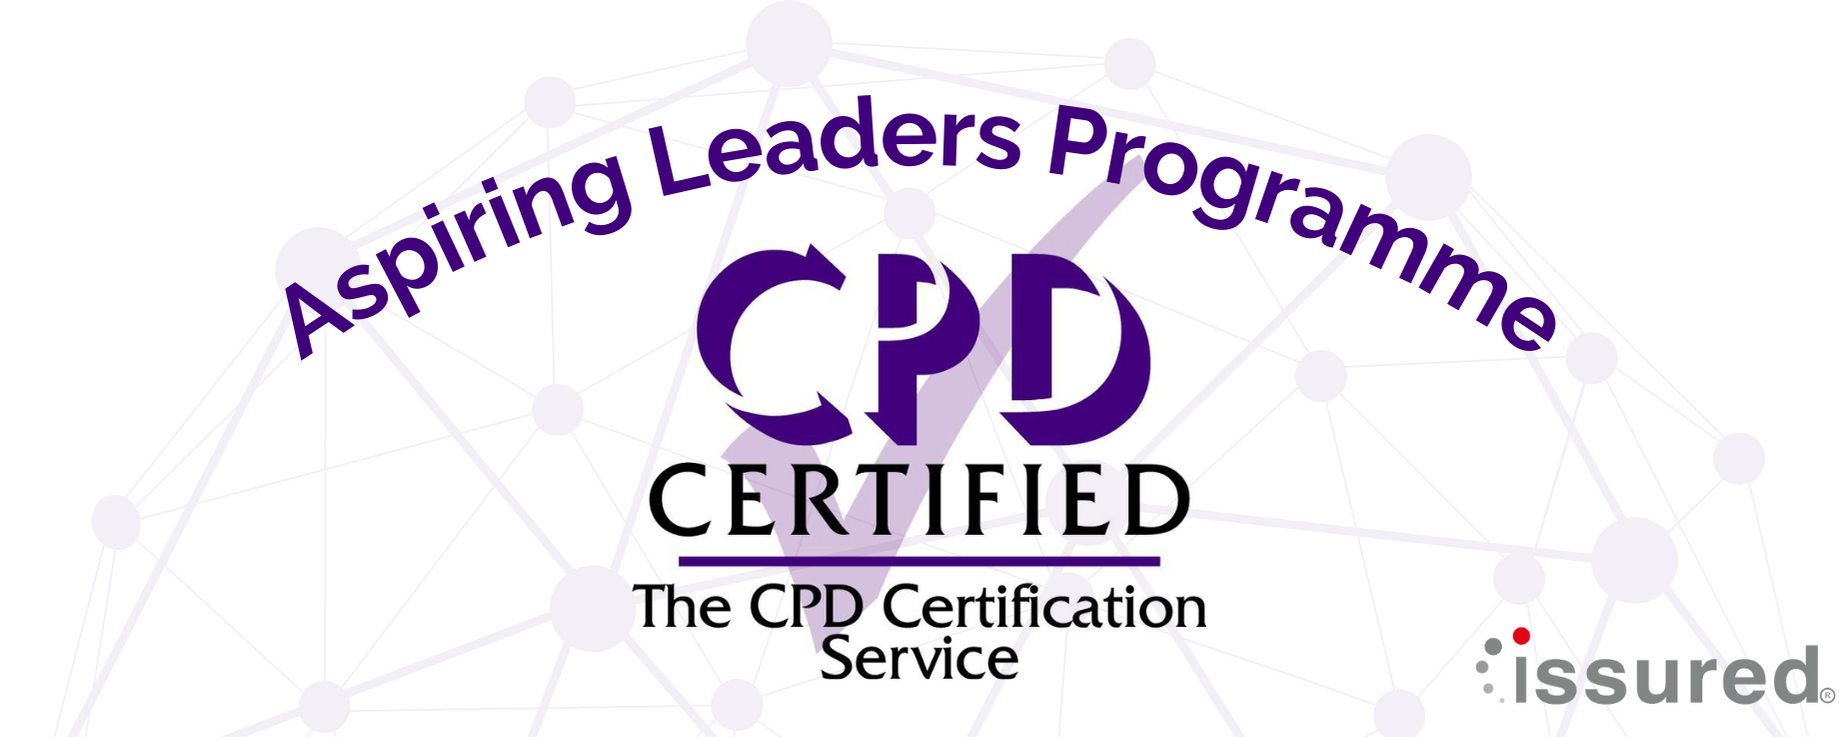 Aspiring Leaders Programme now CPD Certified | Digital Transformation Specialists | Issured Ltd